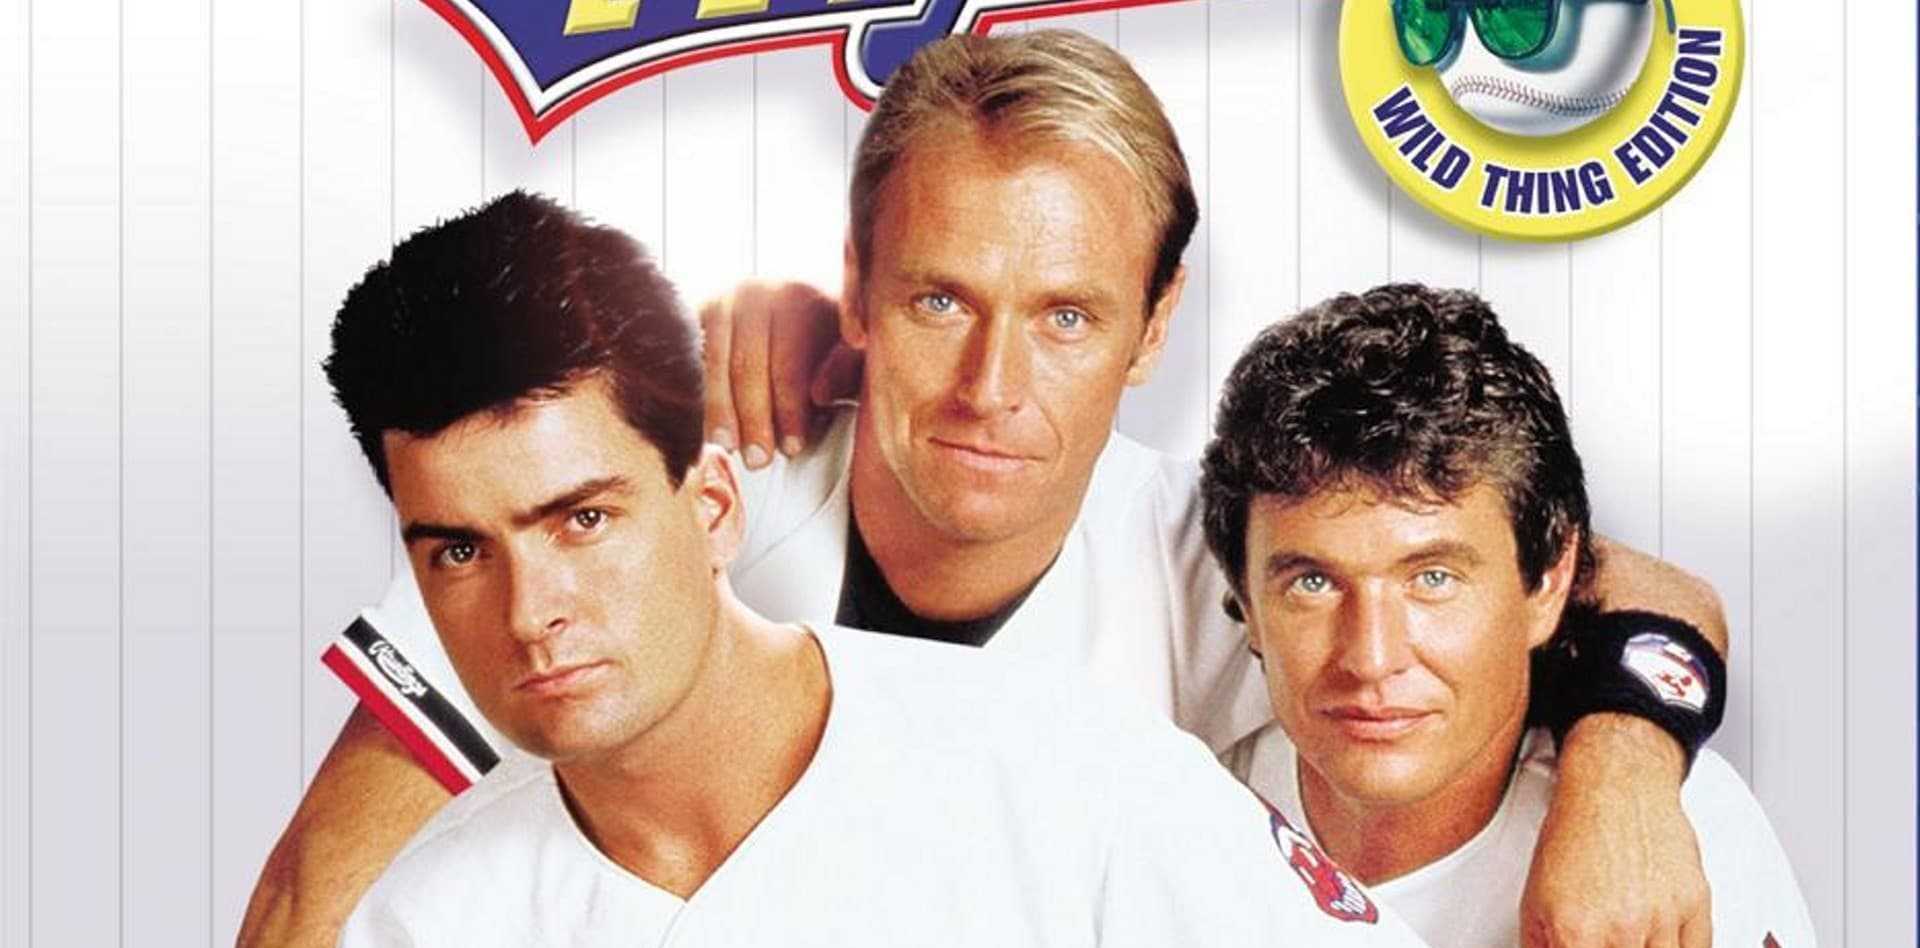 Things You Never Knew About 'Major League' on its 30th Anniversary